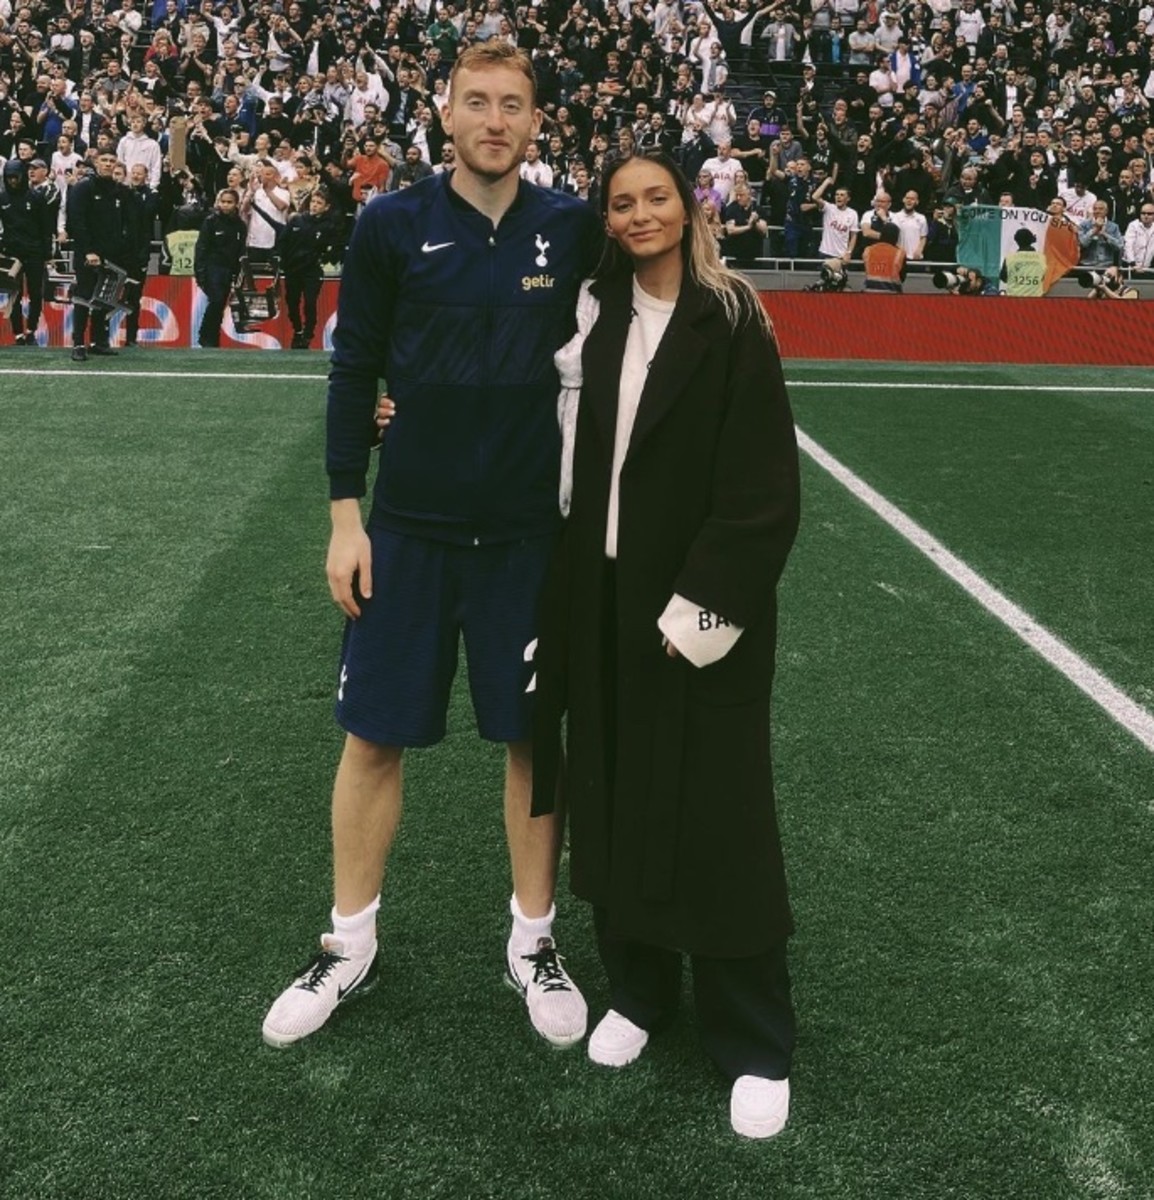 Dejan Kulusevski pictured with girlfriend Eldina Ahmic on the pitch at Tottenham Hotspur Stadium after a Premier League game against Burnley in May 2022